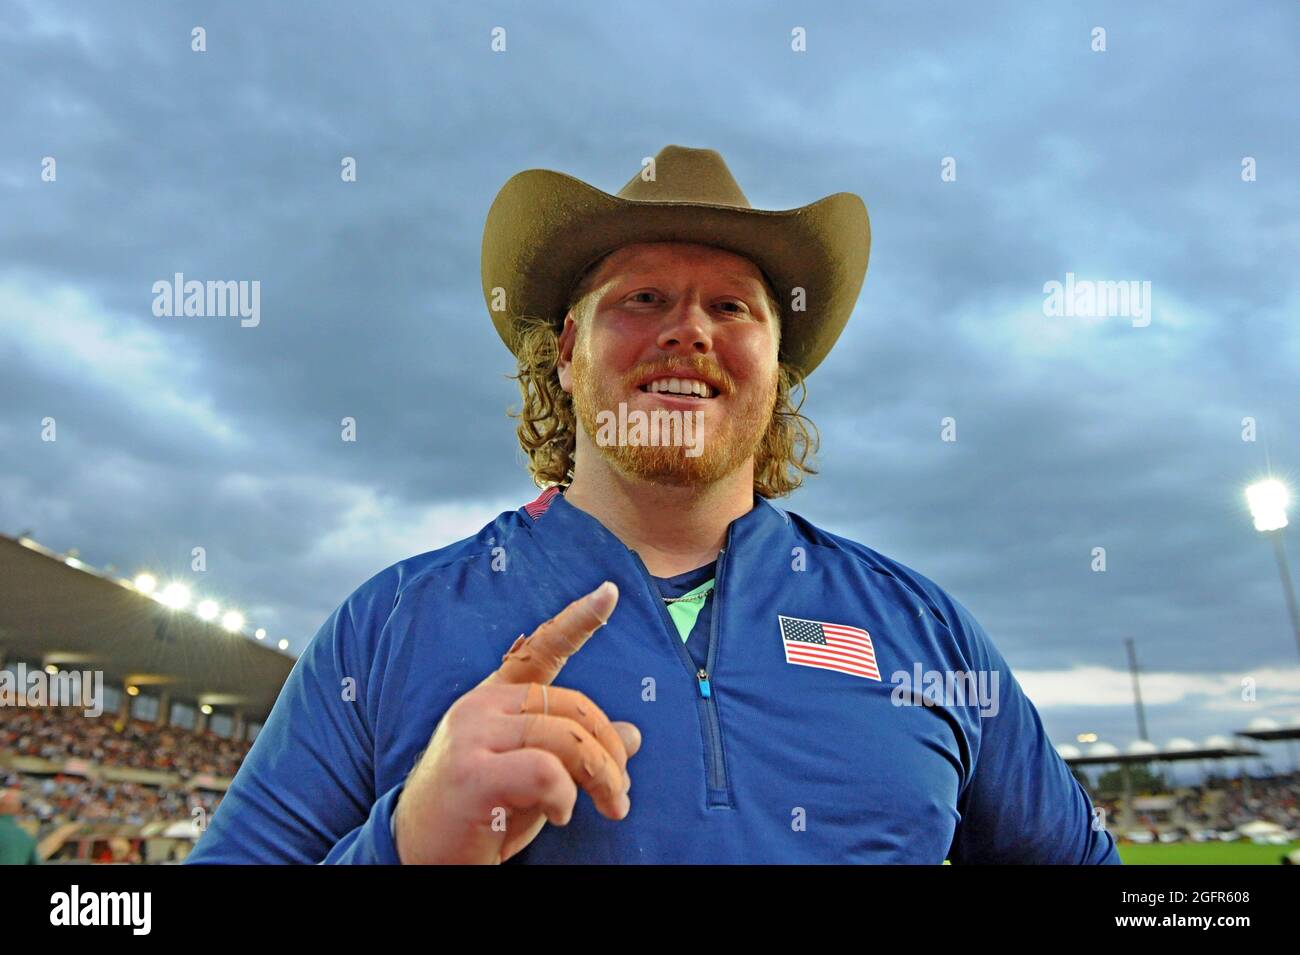 Ryan Crouser (USA) poses with cowboy hat after winning  the shot put at 74-10 (22.811m) during the Athletissima meeting Stade Olympique de la Pontaise Stock Photo